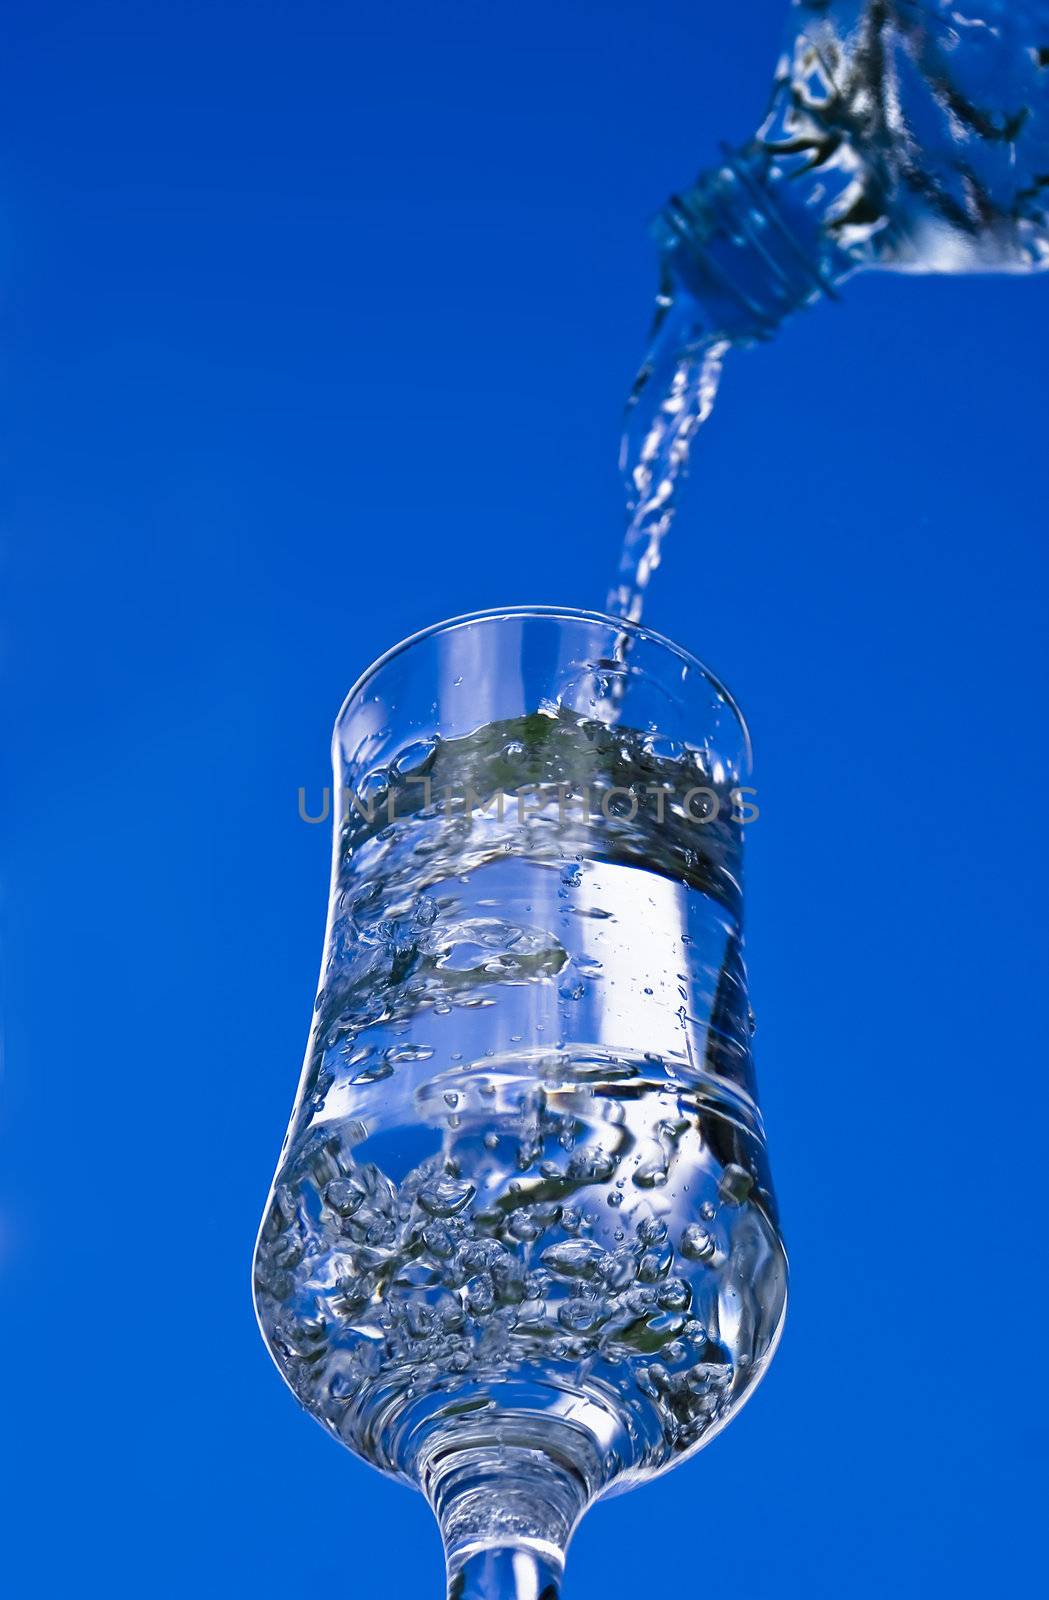 Pouring glass of water on the blue sky background